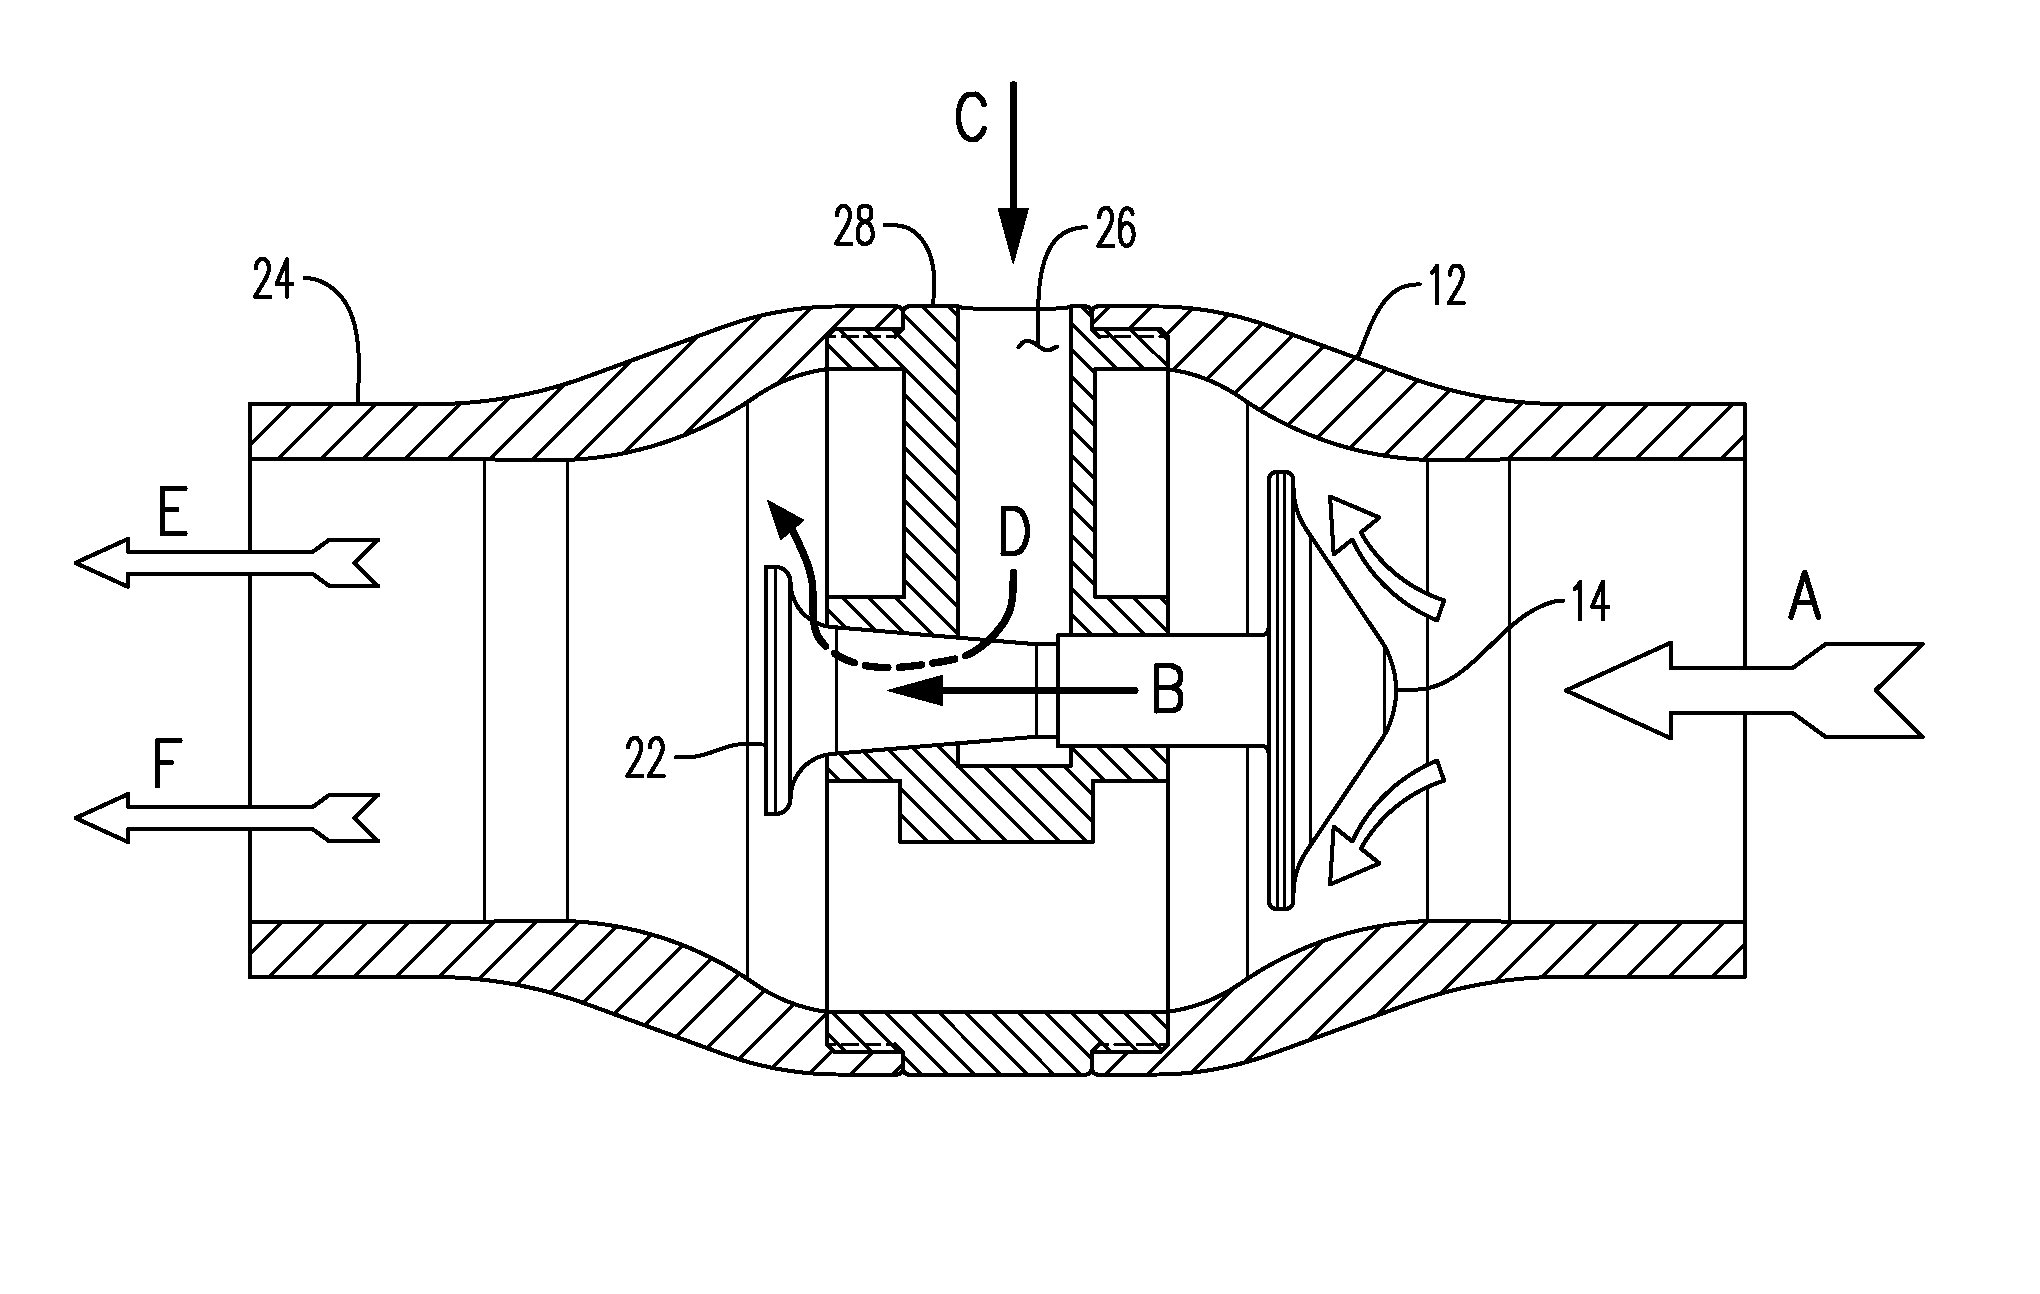 Secondary Fuel Premixing Controller for an Air Intake Manifold of a Combustion Engine